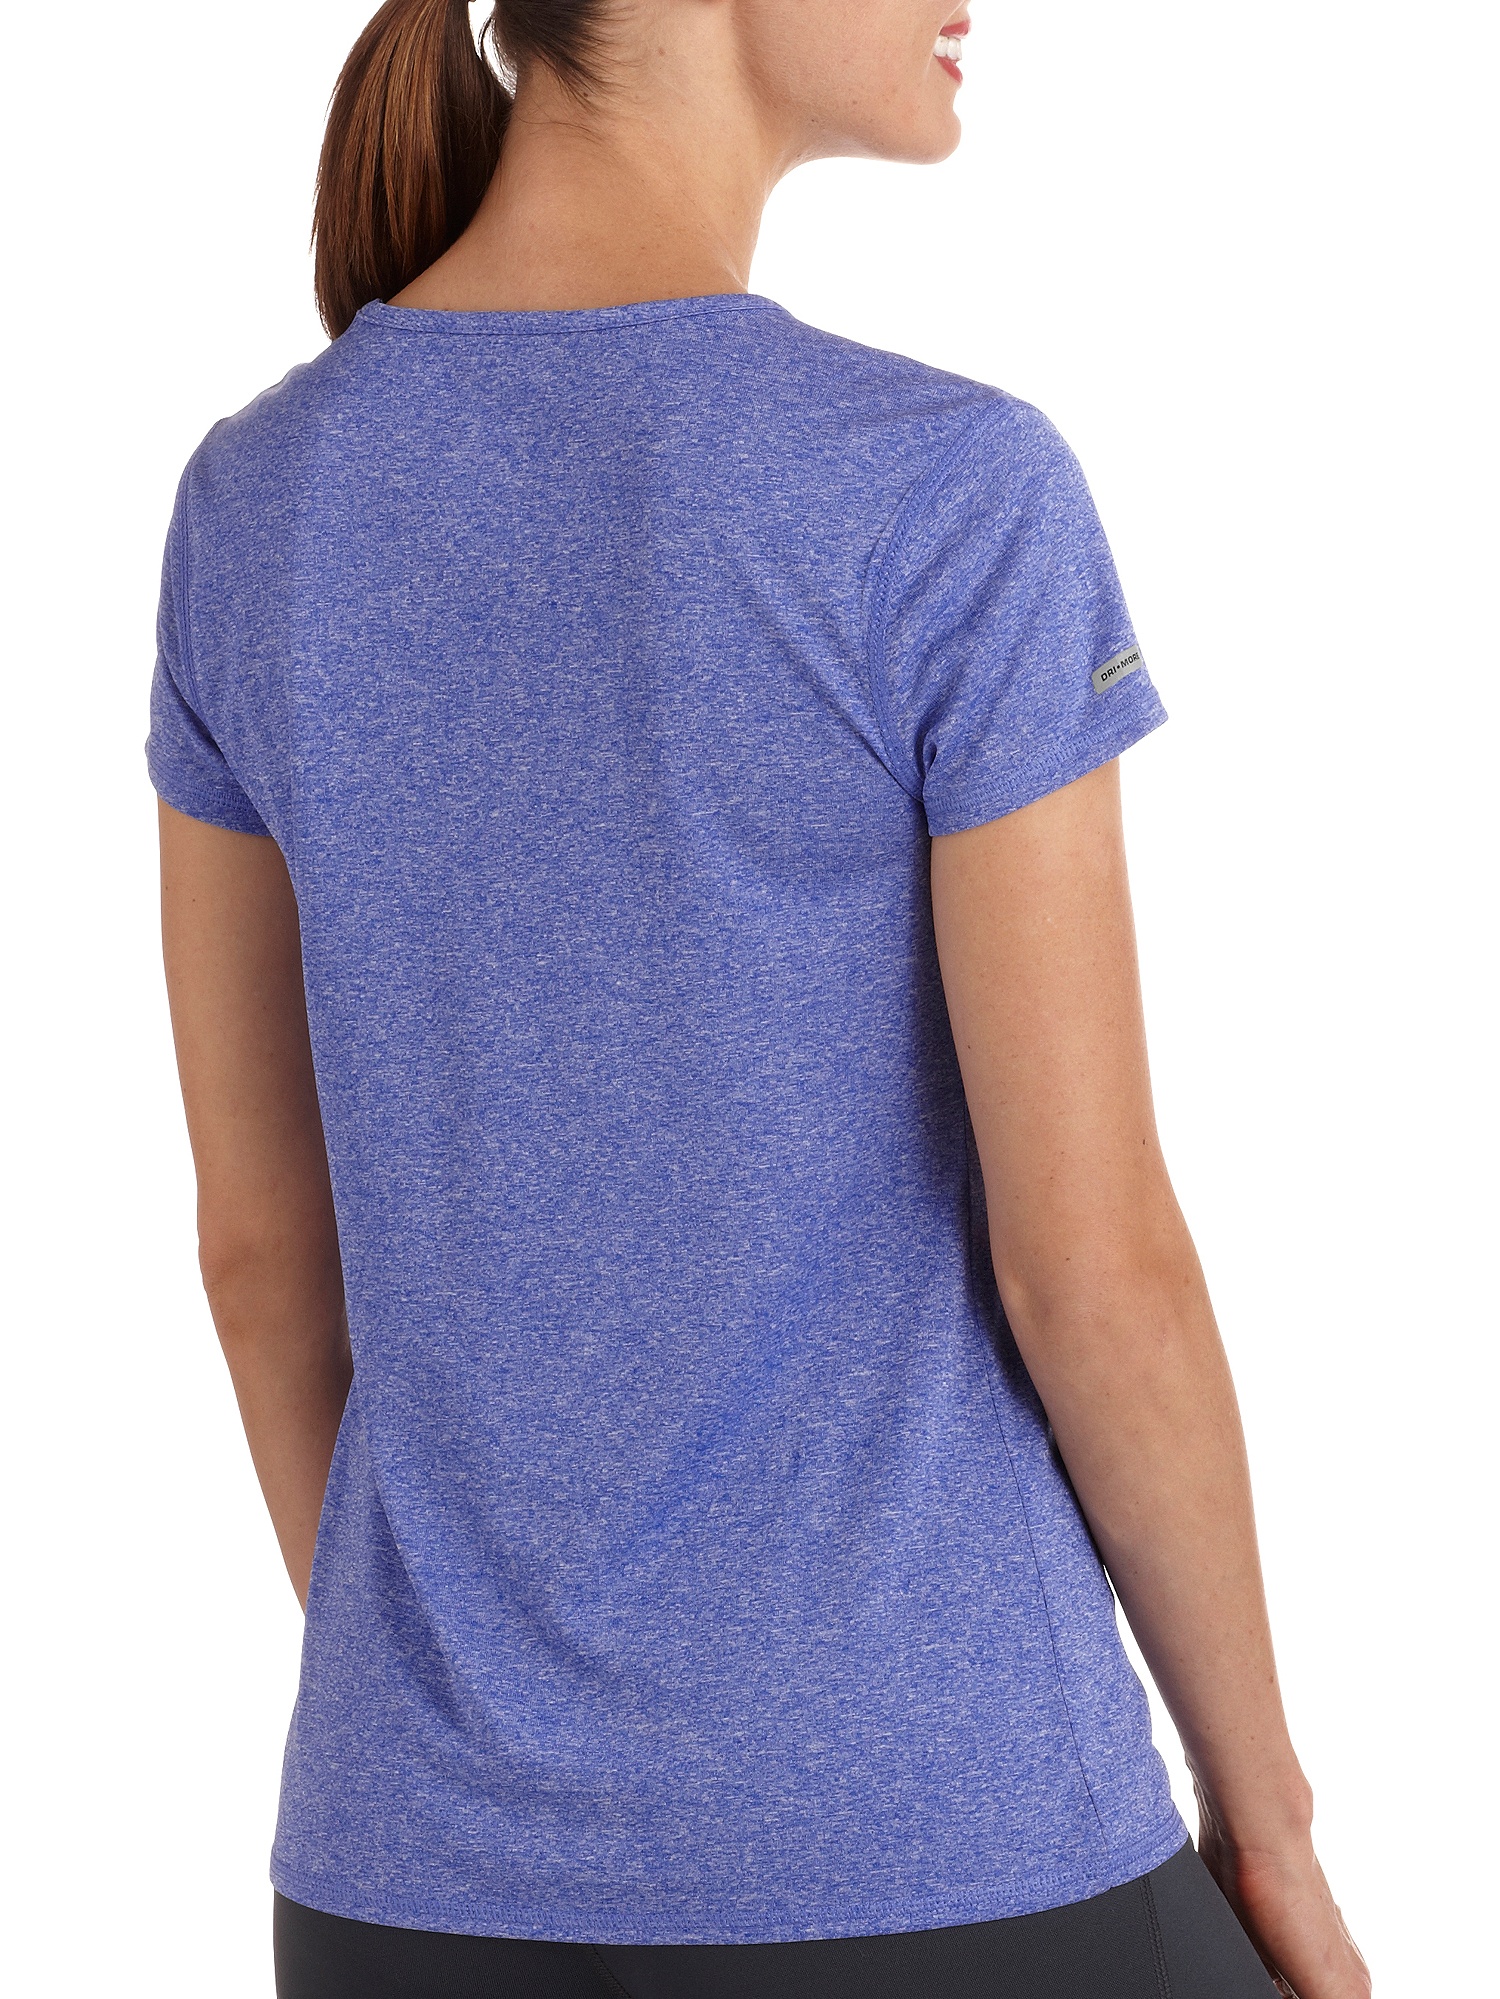 Danskin Now Women's Performance Tee With Flattering Seaming and Wicking 2-Pack - image 2 of 4